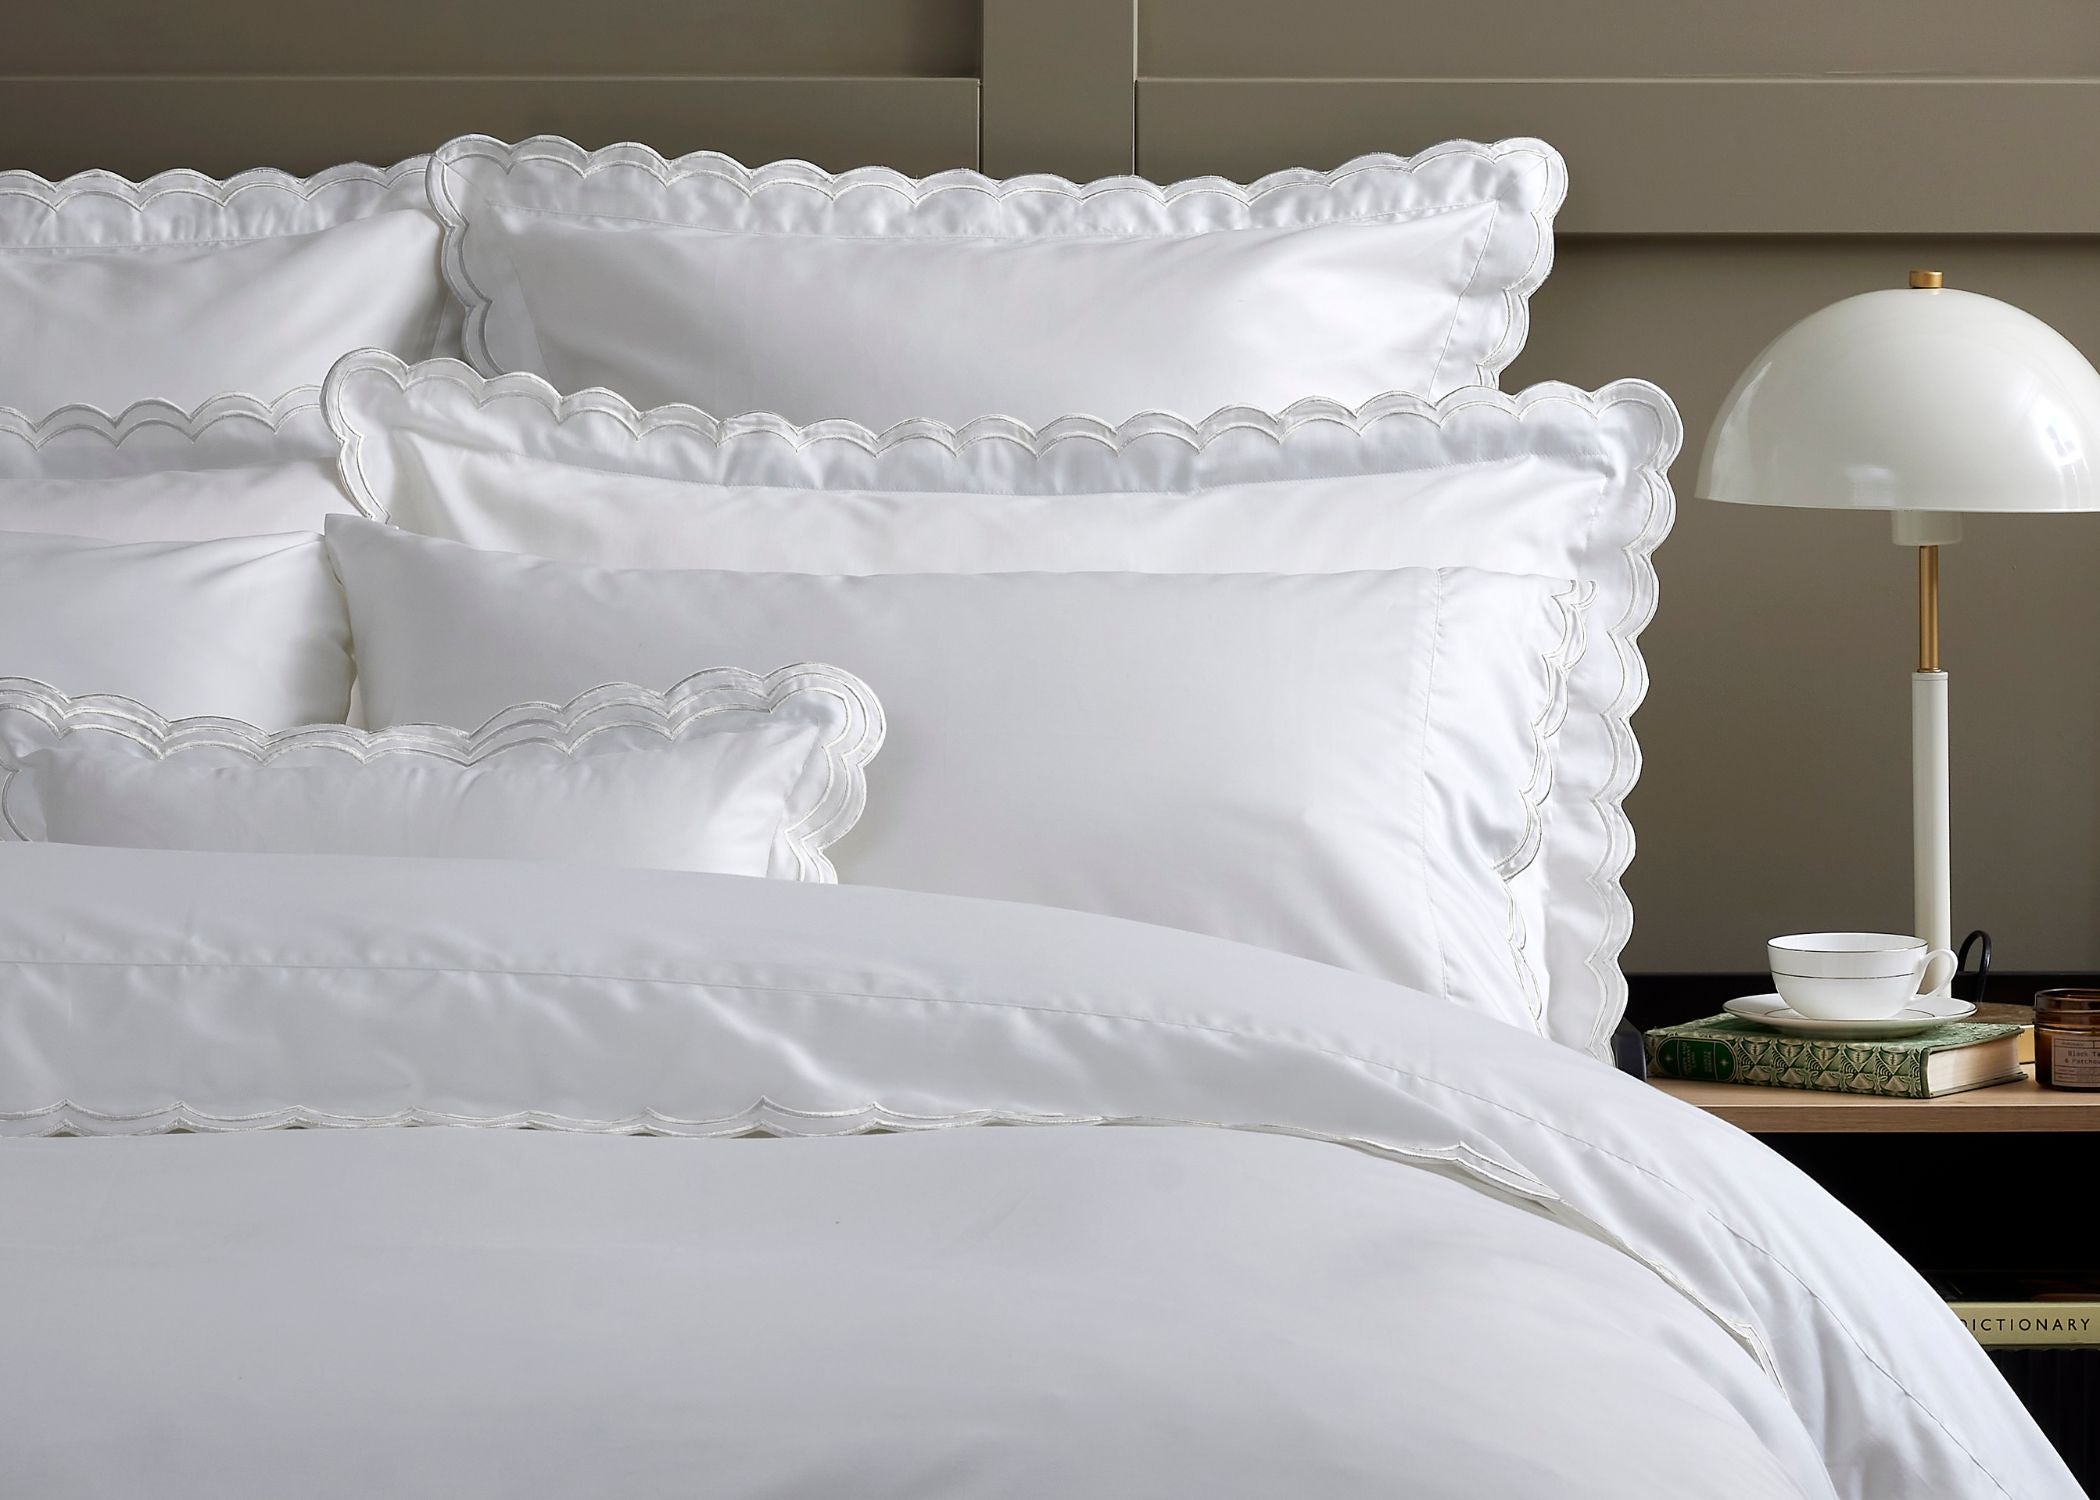 Christy "Scallop Edge" Duvet Cover Sets in White